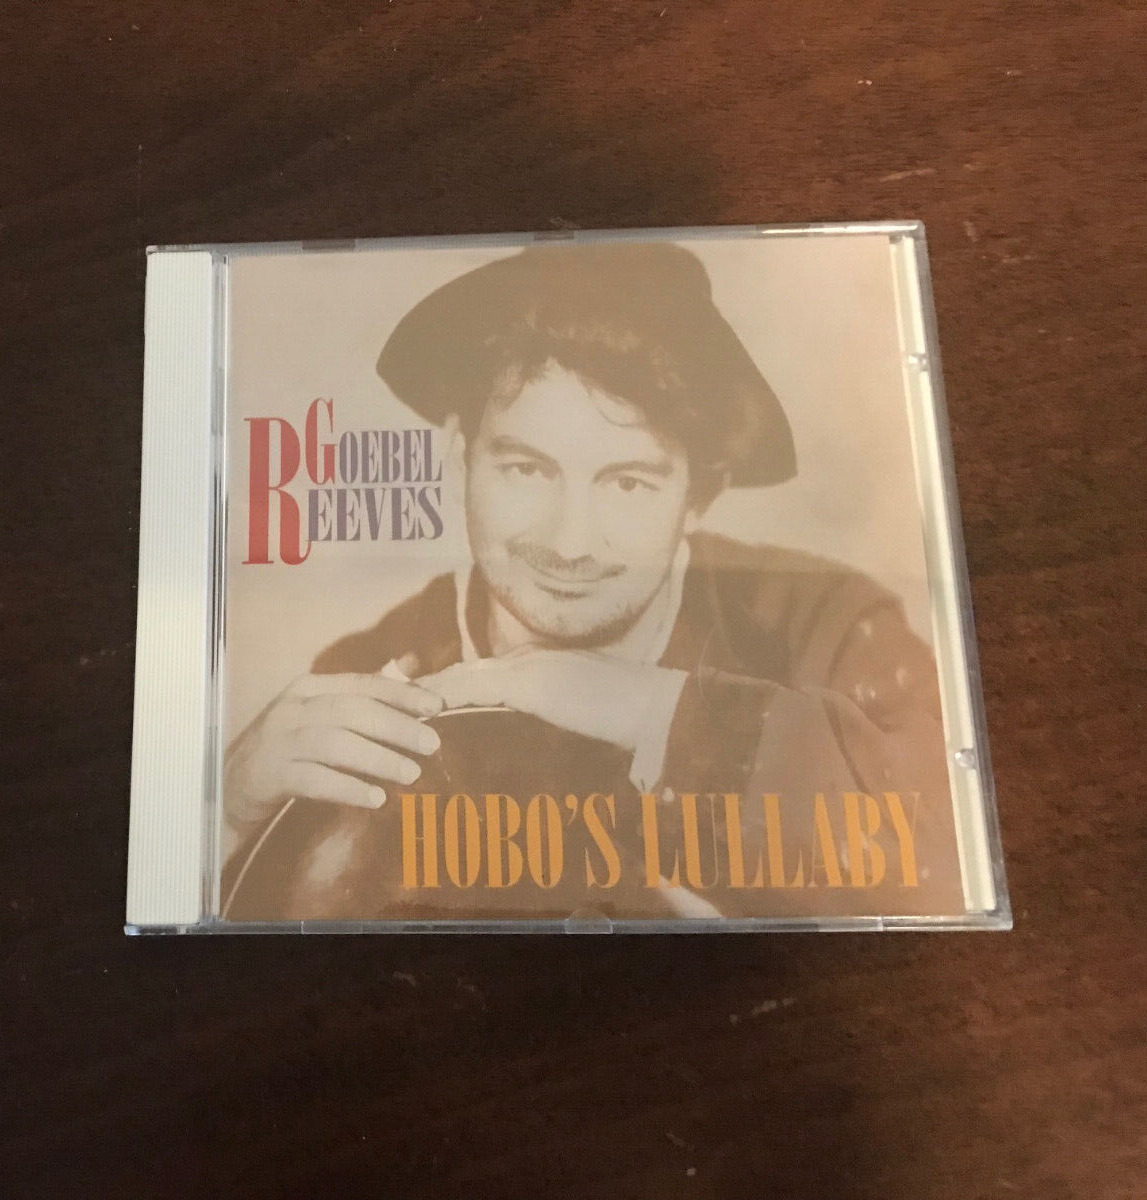 Vintage Goebel Reeves, Hobo`S Lullaby CD Bear Family Records